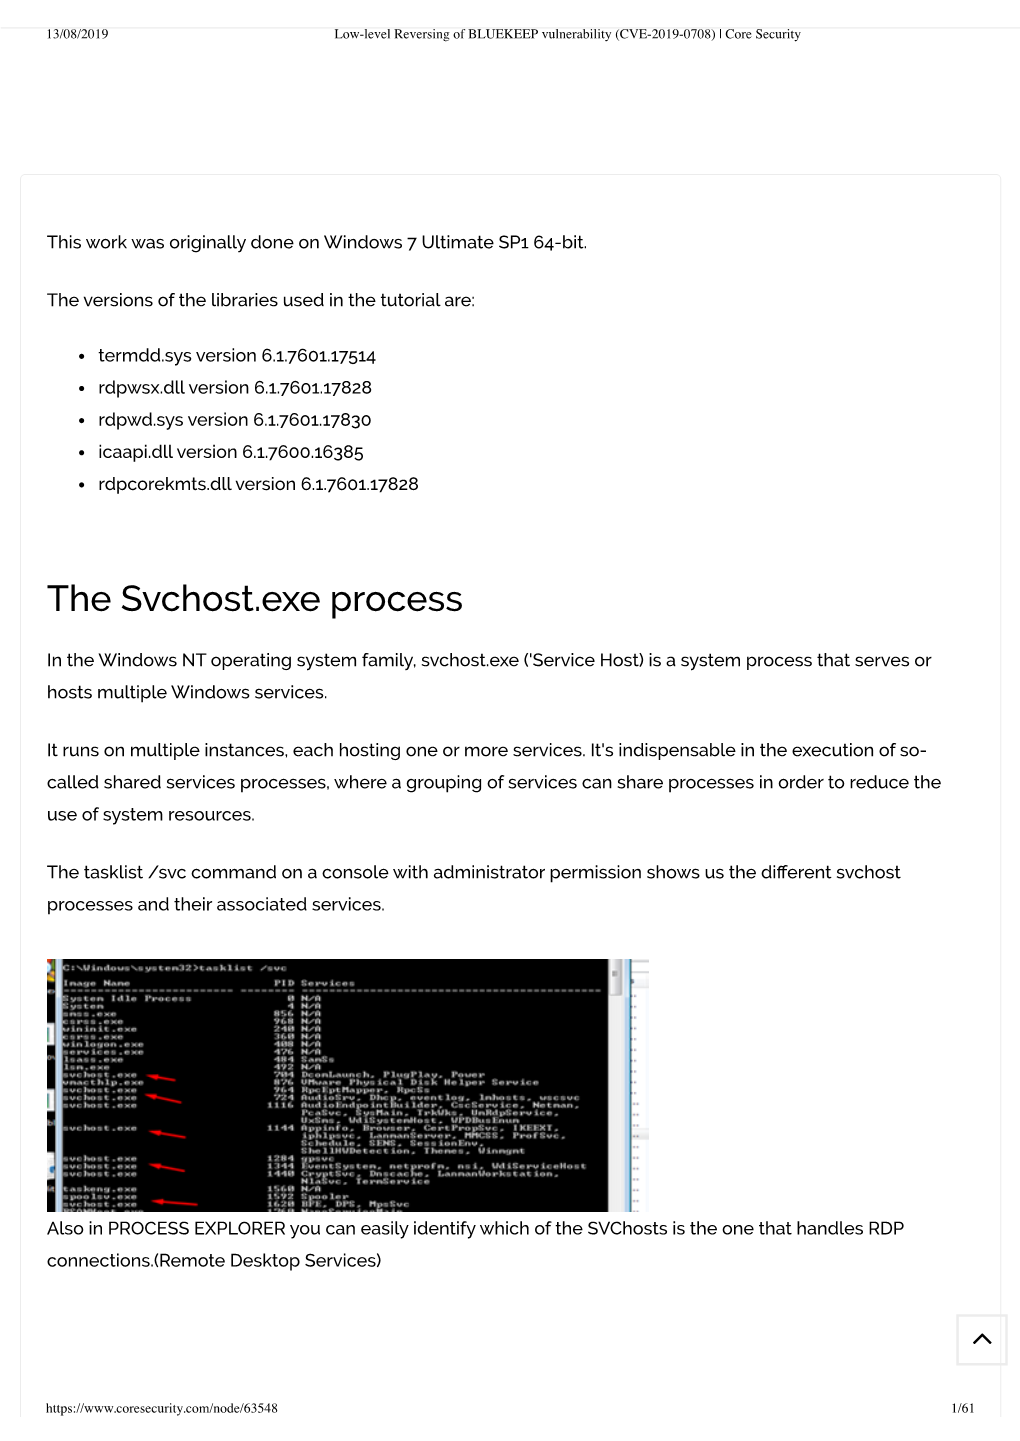 The Svchost.Exe Process